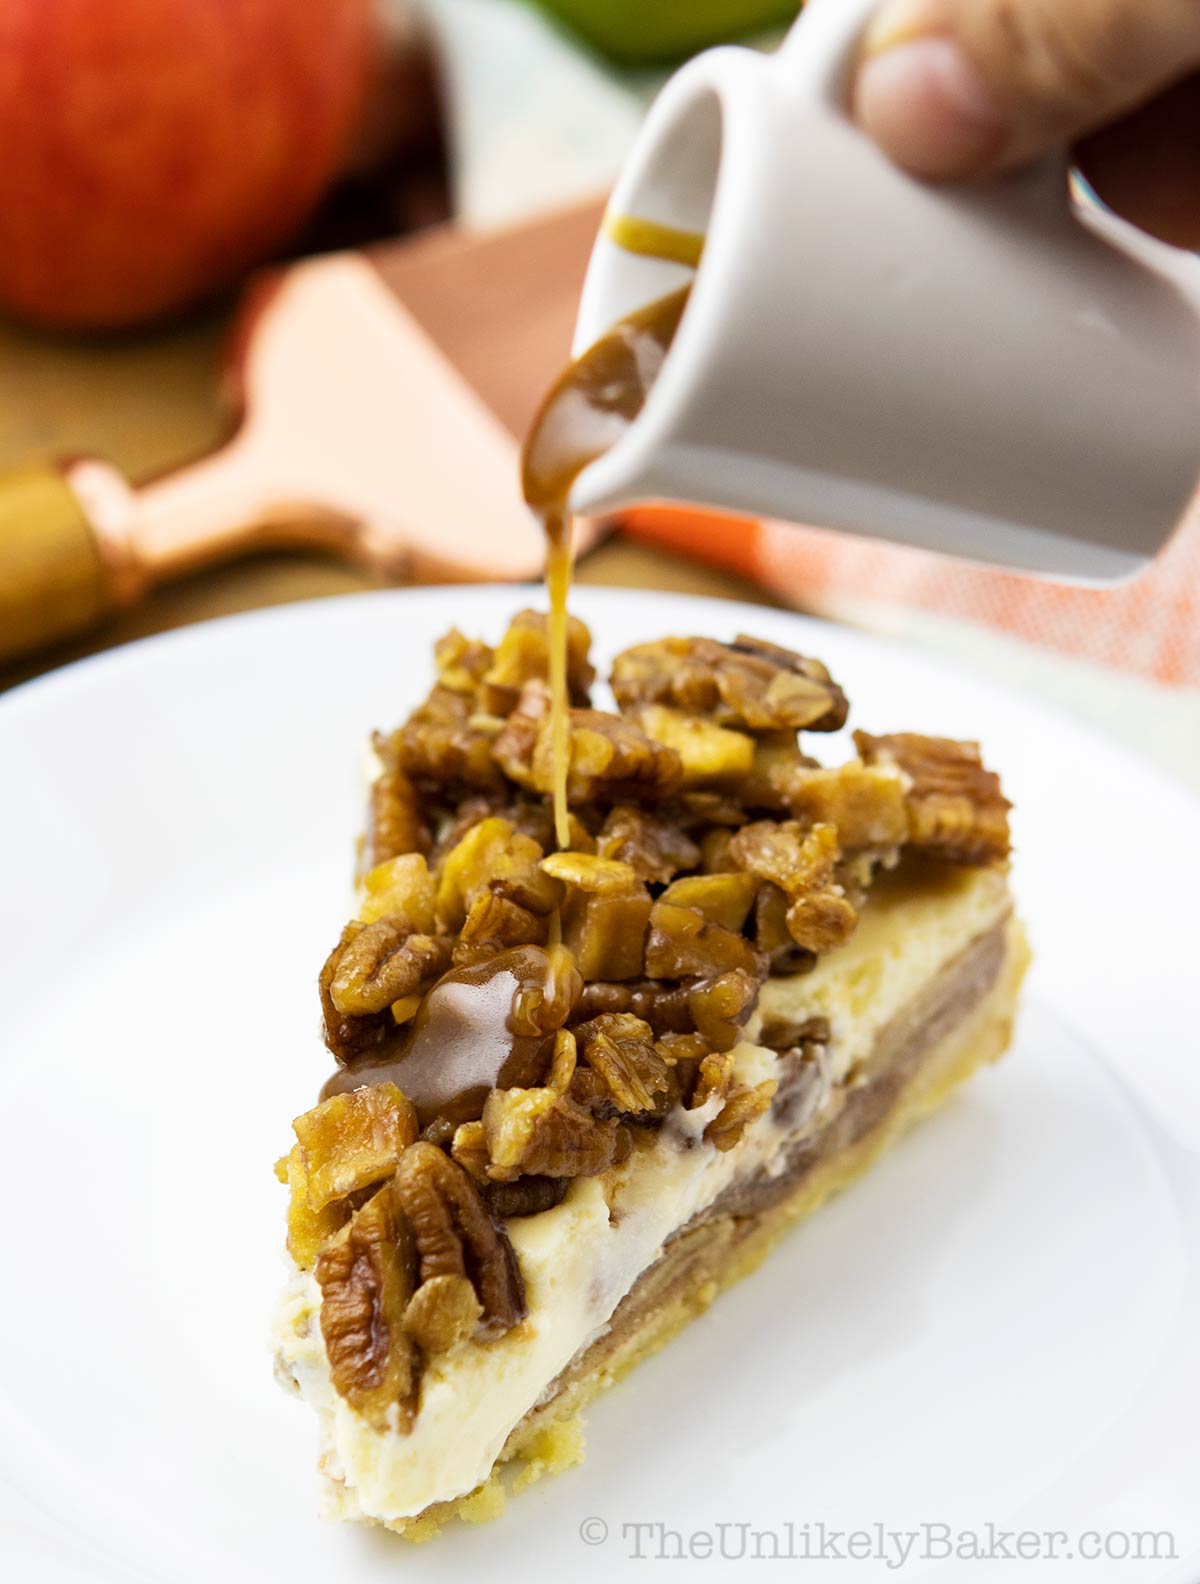 Caramel sauce poured over a slice of apple crumble caramel cheesecake.